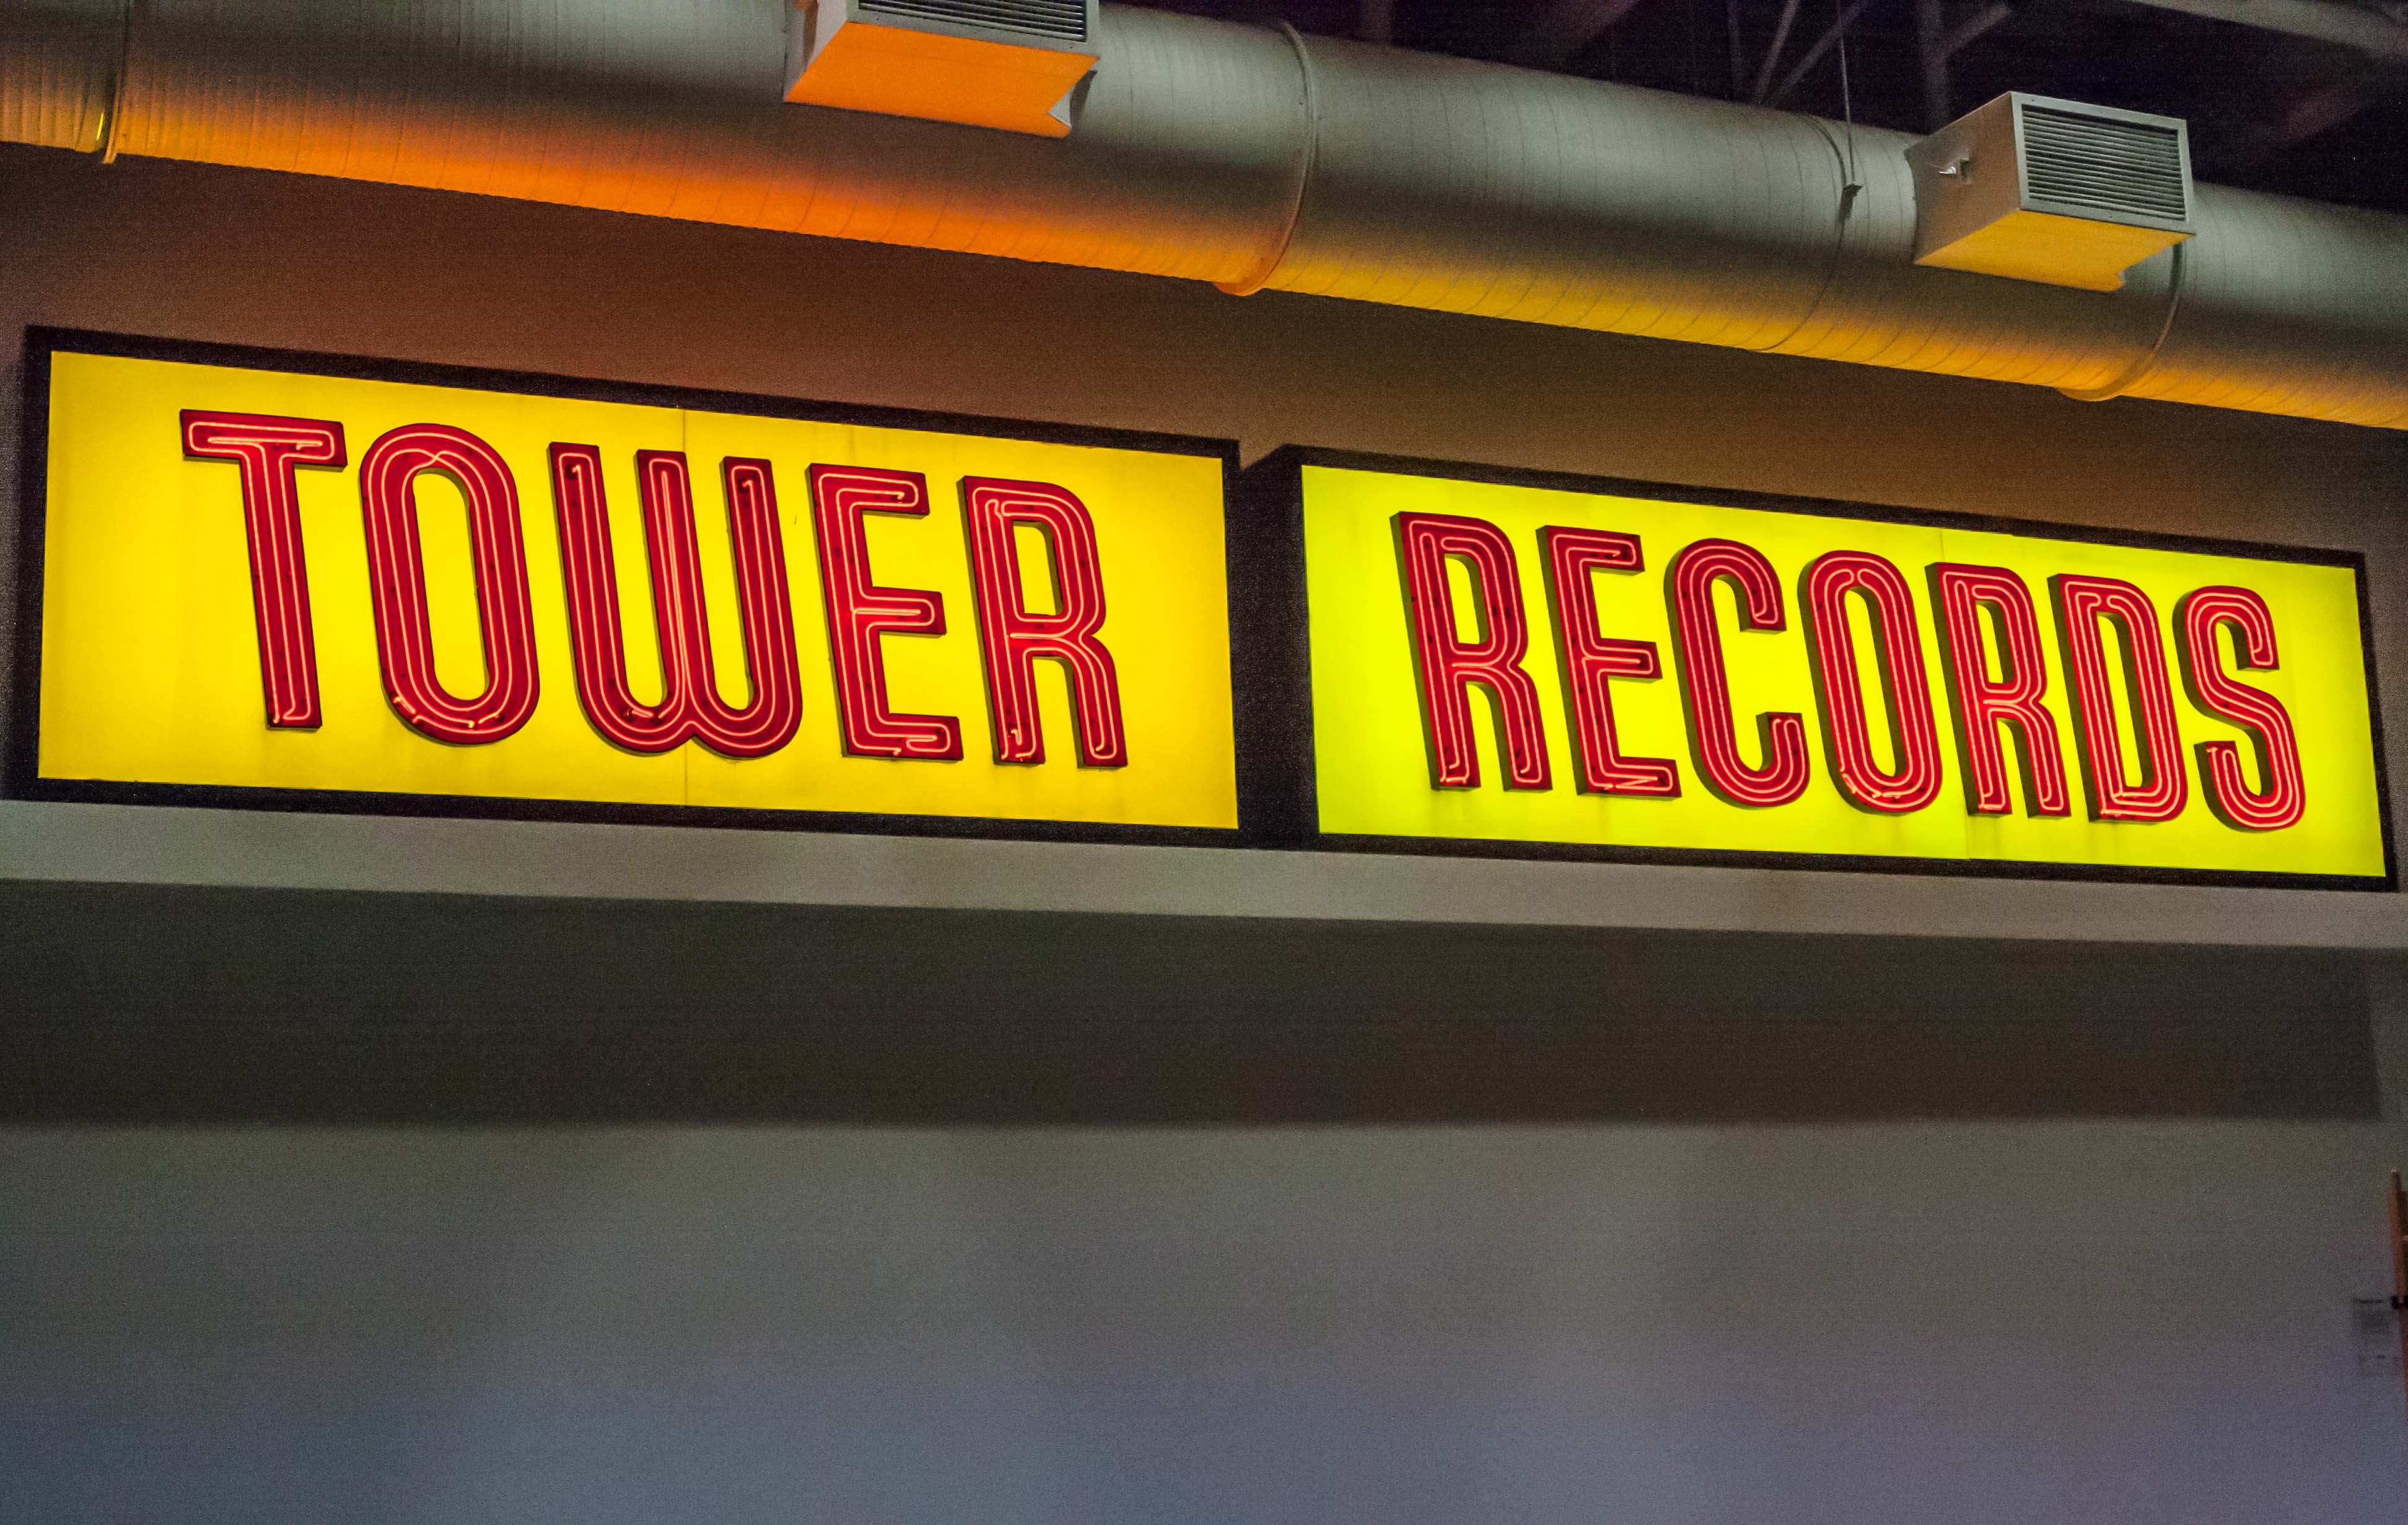 The original signage of Tower Records now hangs in the concourse of The Golden 1 Center, home of the Sacramento Kings.